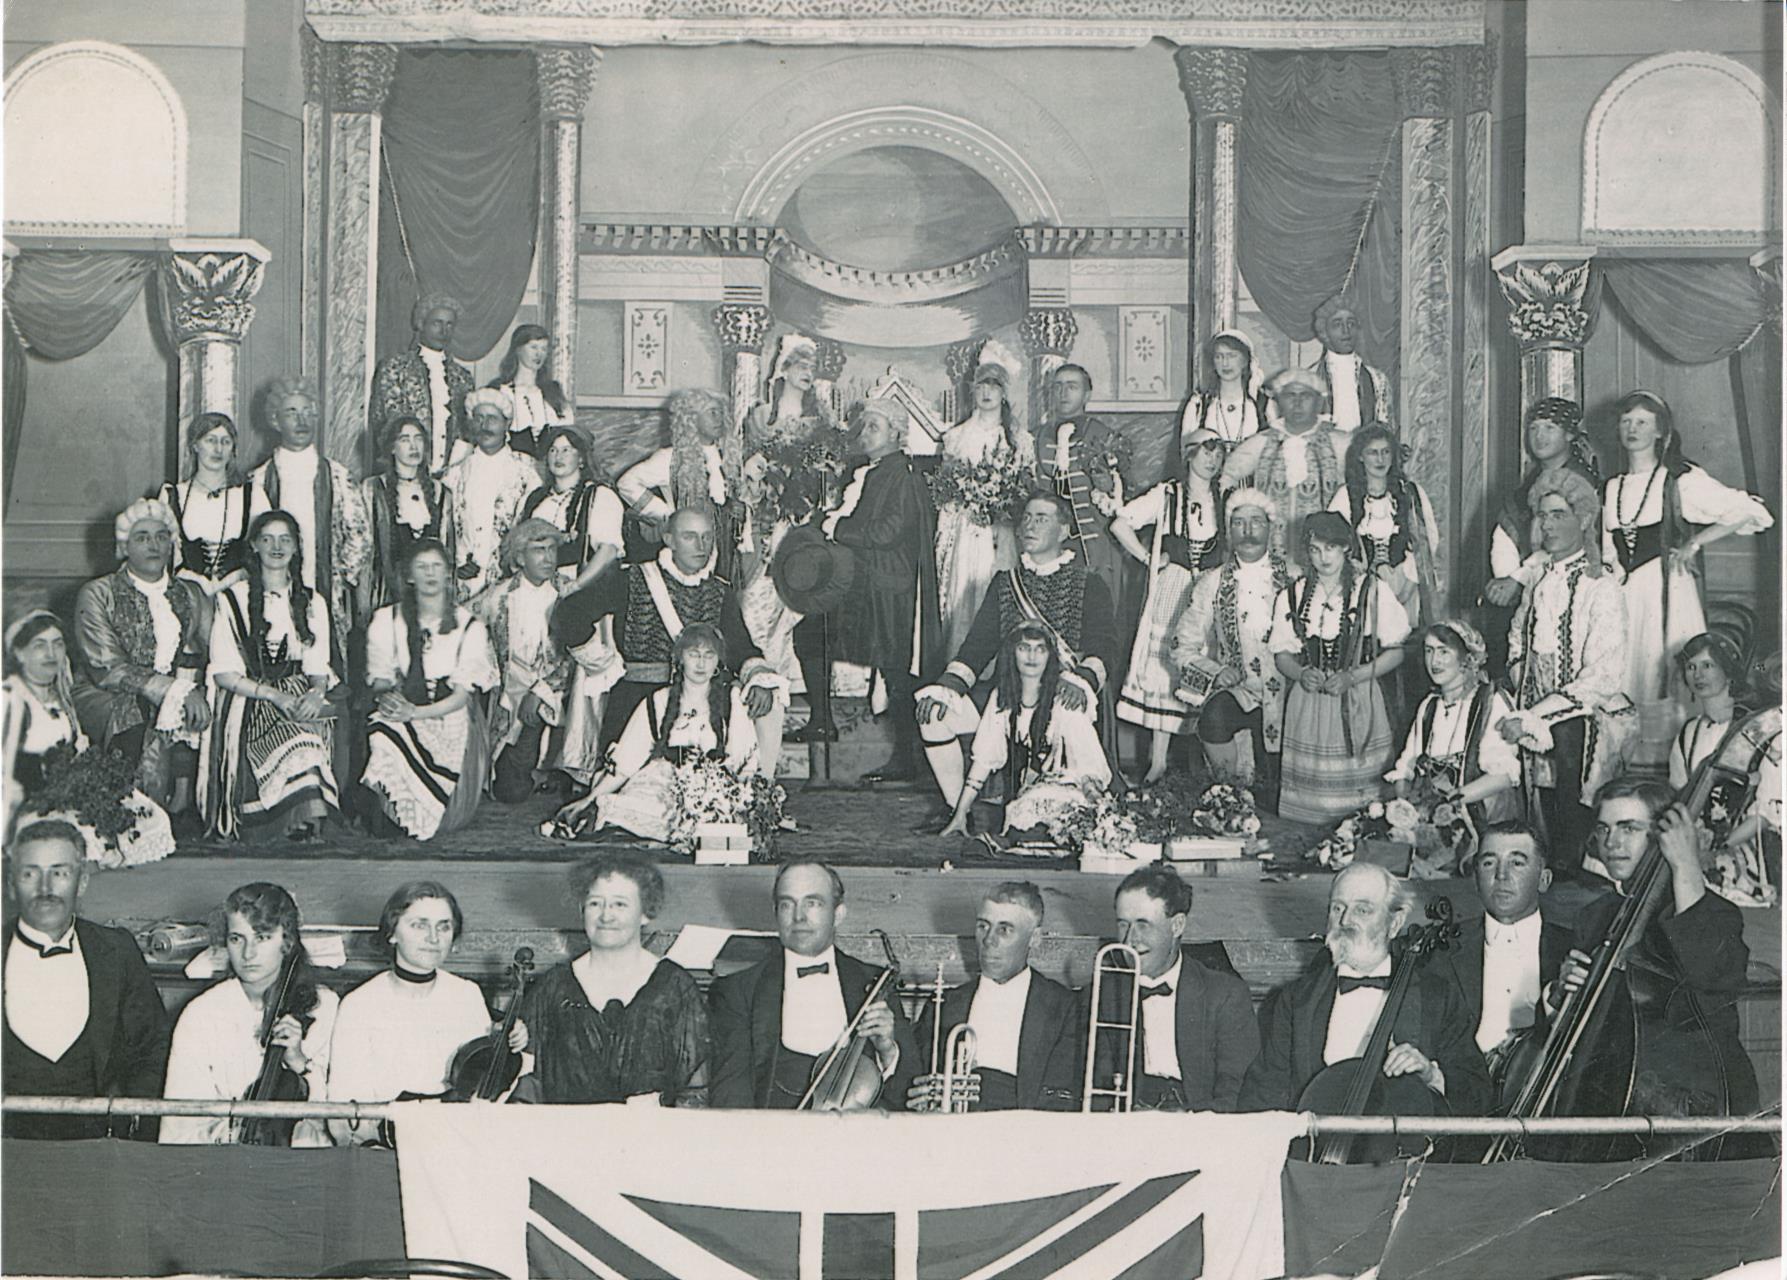 Albany Choral Society on stage at the Albany Town Hall [ca 1920]